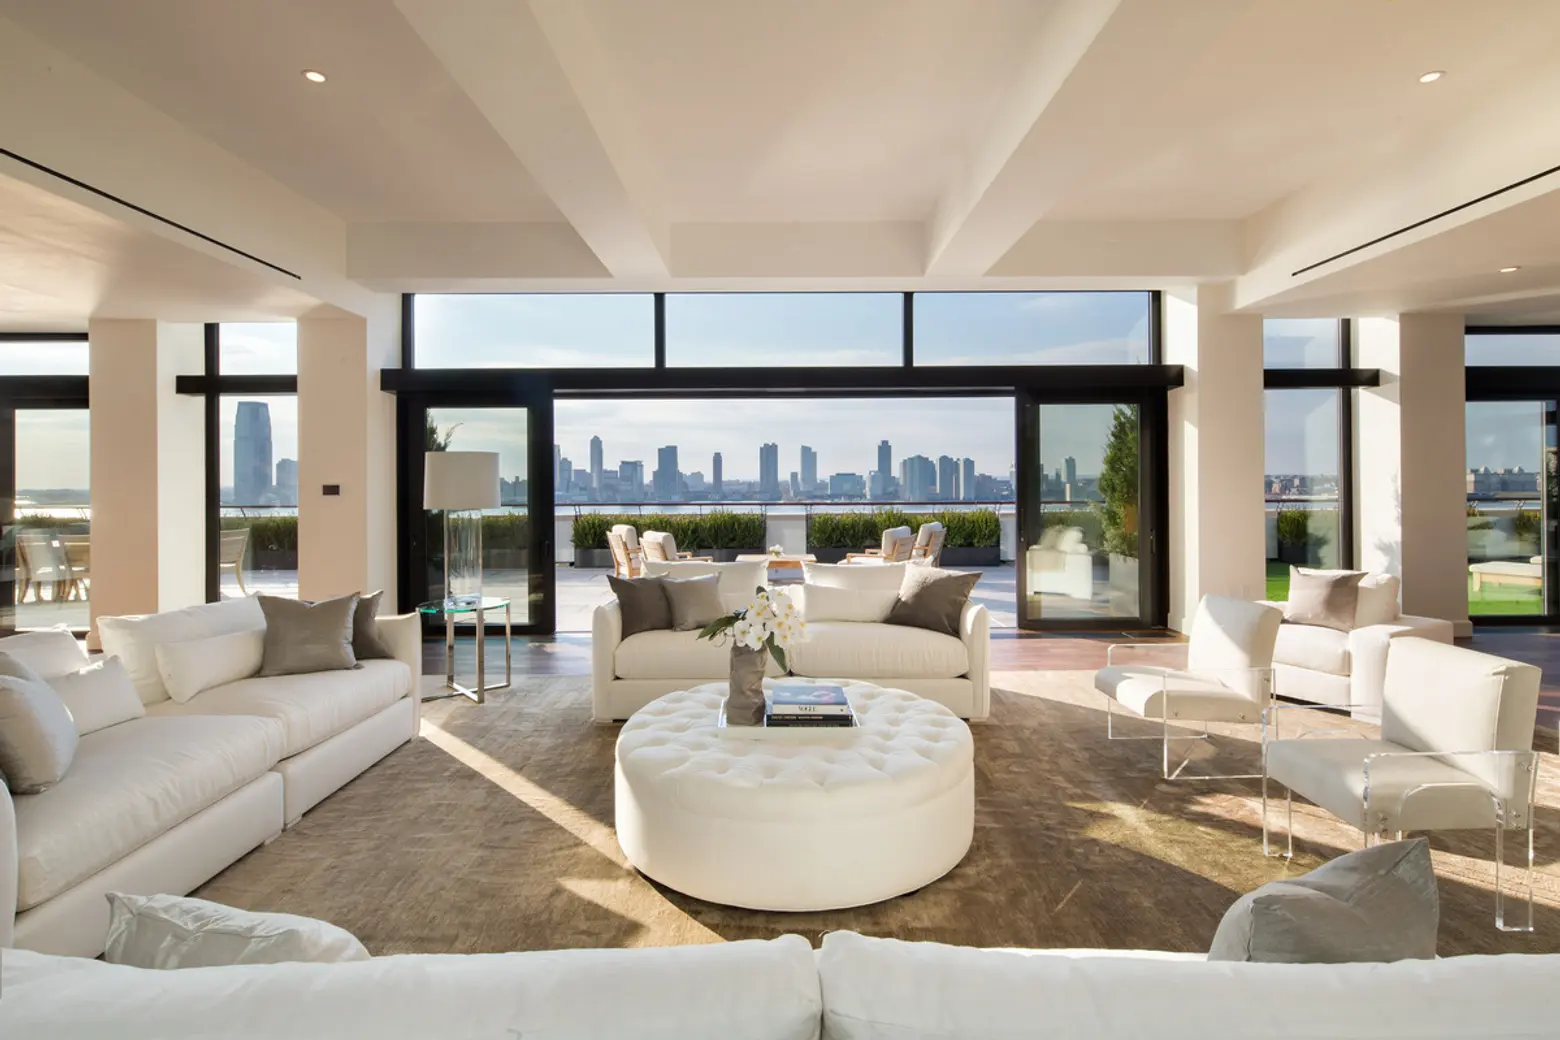 A Rich (and Potentially Famous) Buyer Snags the Penthouse at 250 West for $29.5 Million